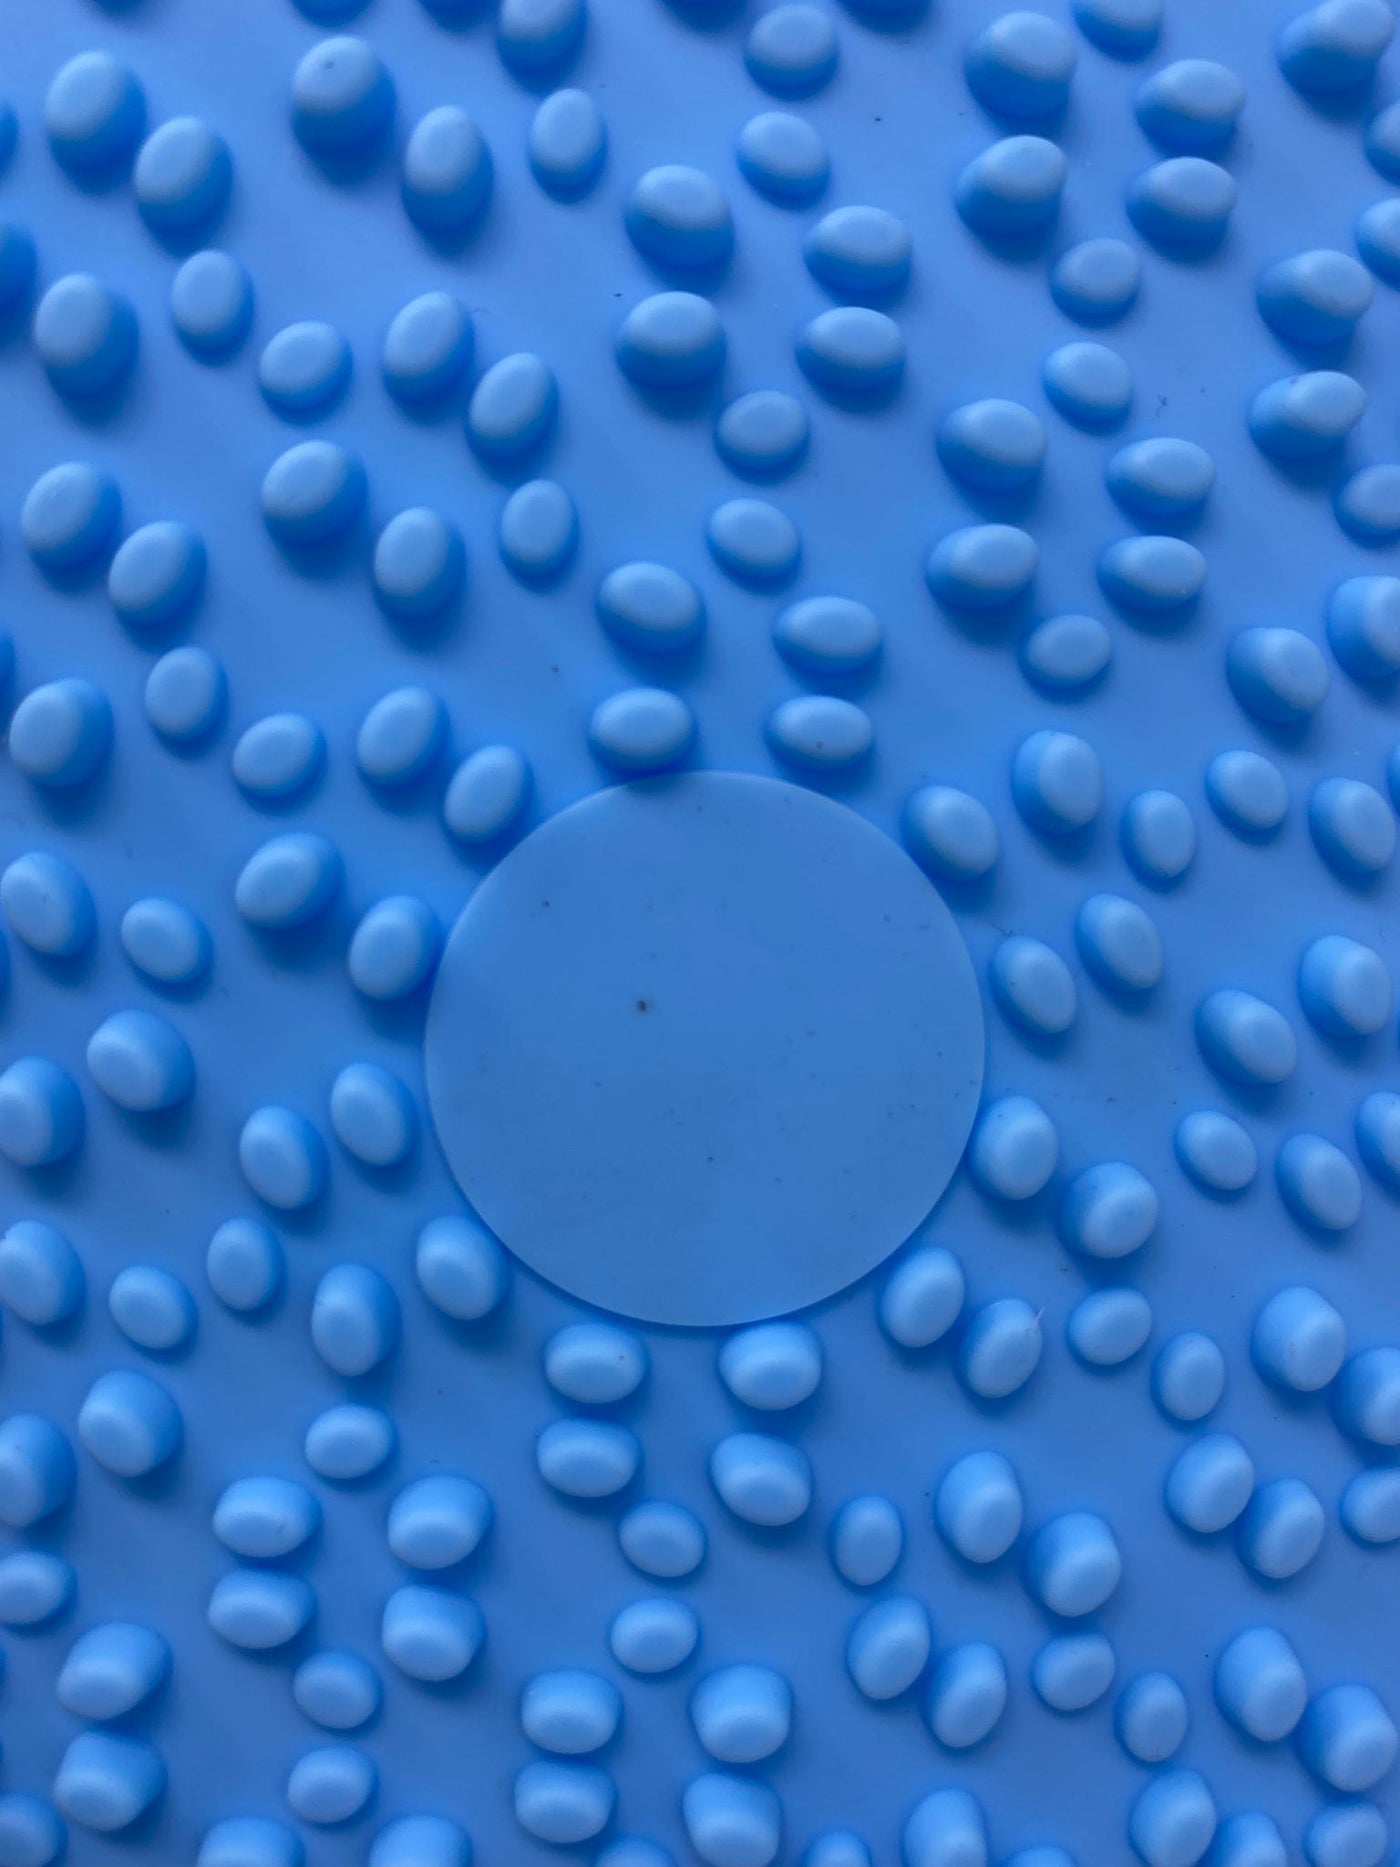 Outlet - BLUE MUNCHIE MAT WITH SUCTION CUPS - 0065